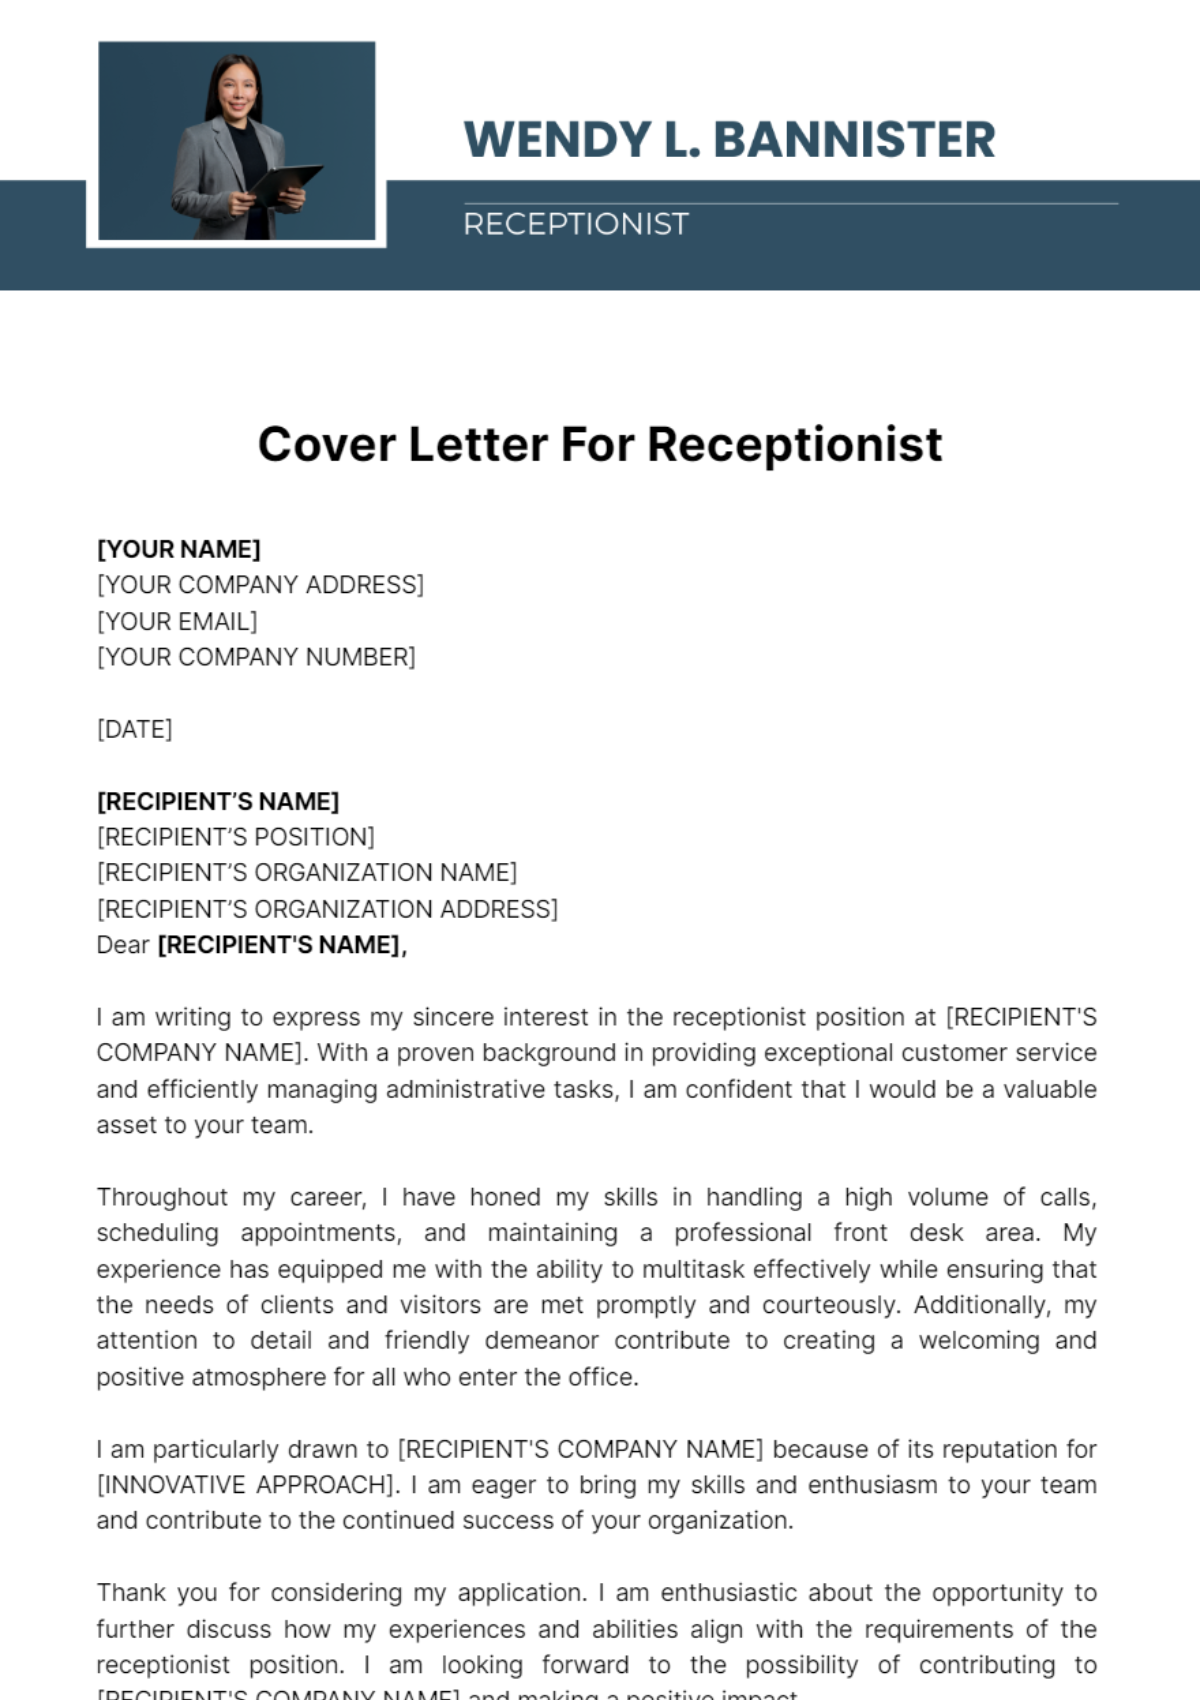 Cover Letter For Receptionist Template